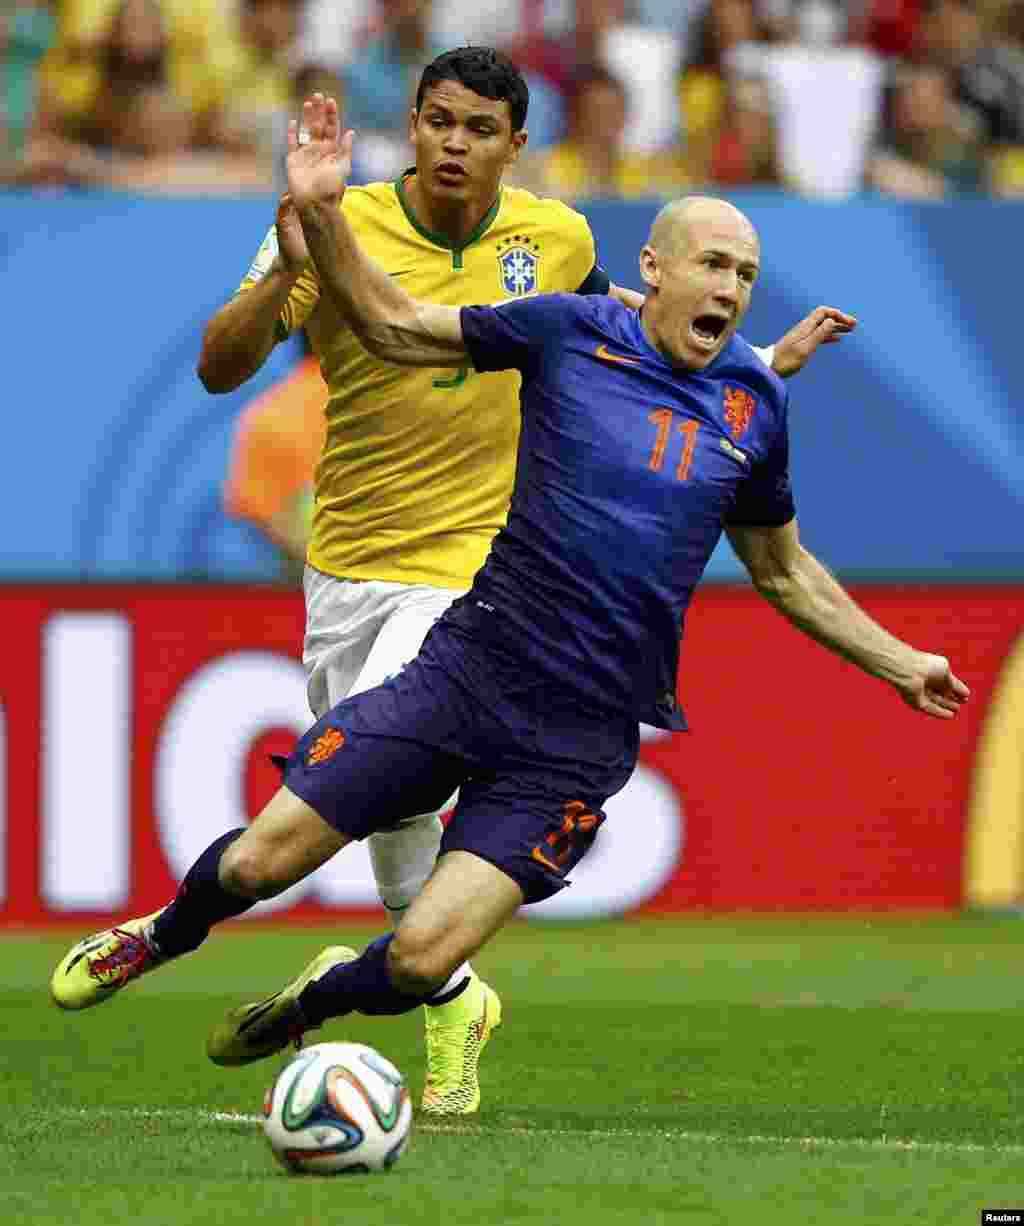 Brazil. 12Jul. Brazil's Thiago Silva (L) fouls Arjen Robben of the Netherlands to concede a penalty during their 2014 World Cup third-place playoff at the Brasilia national stadium in Brasilia